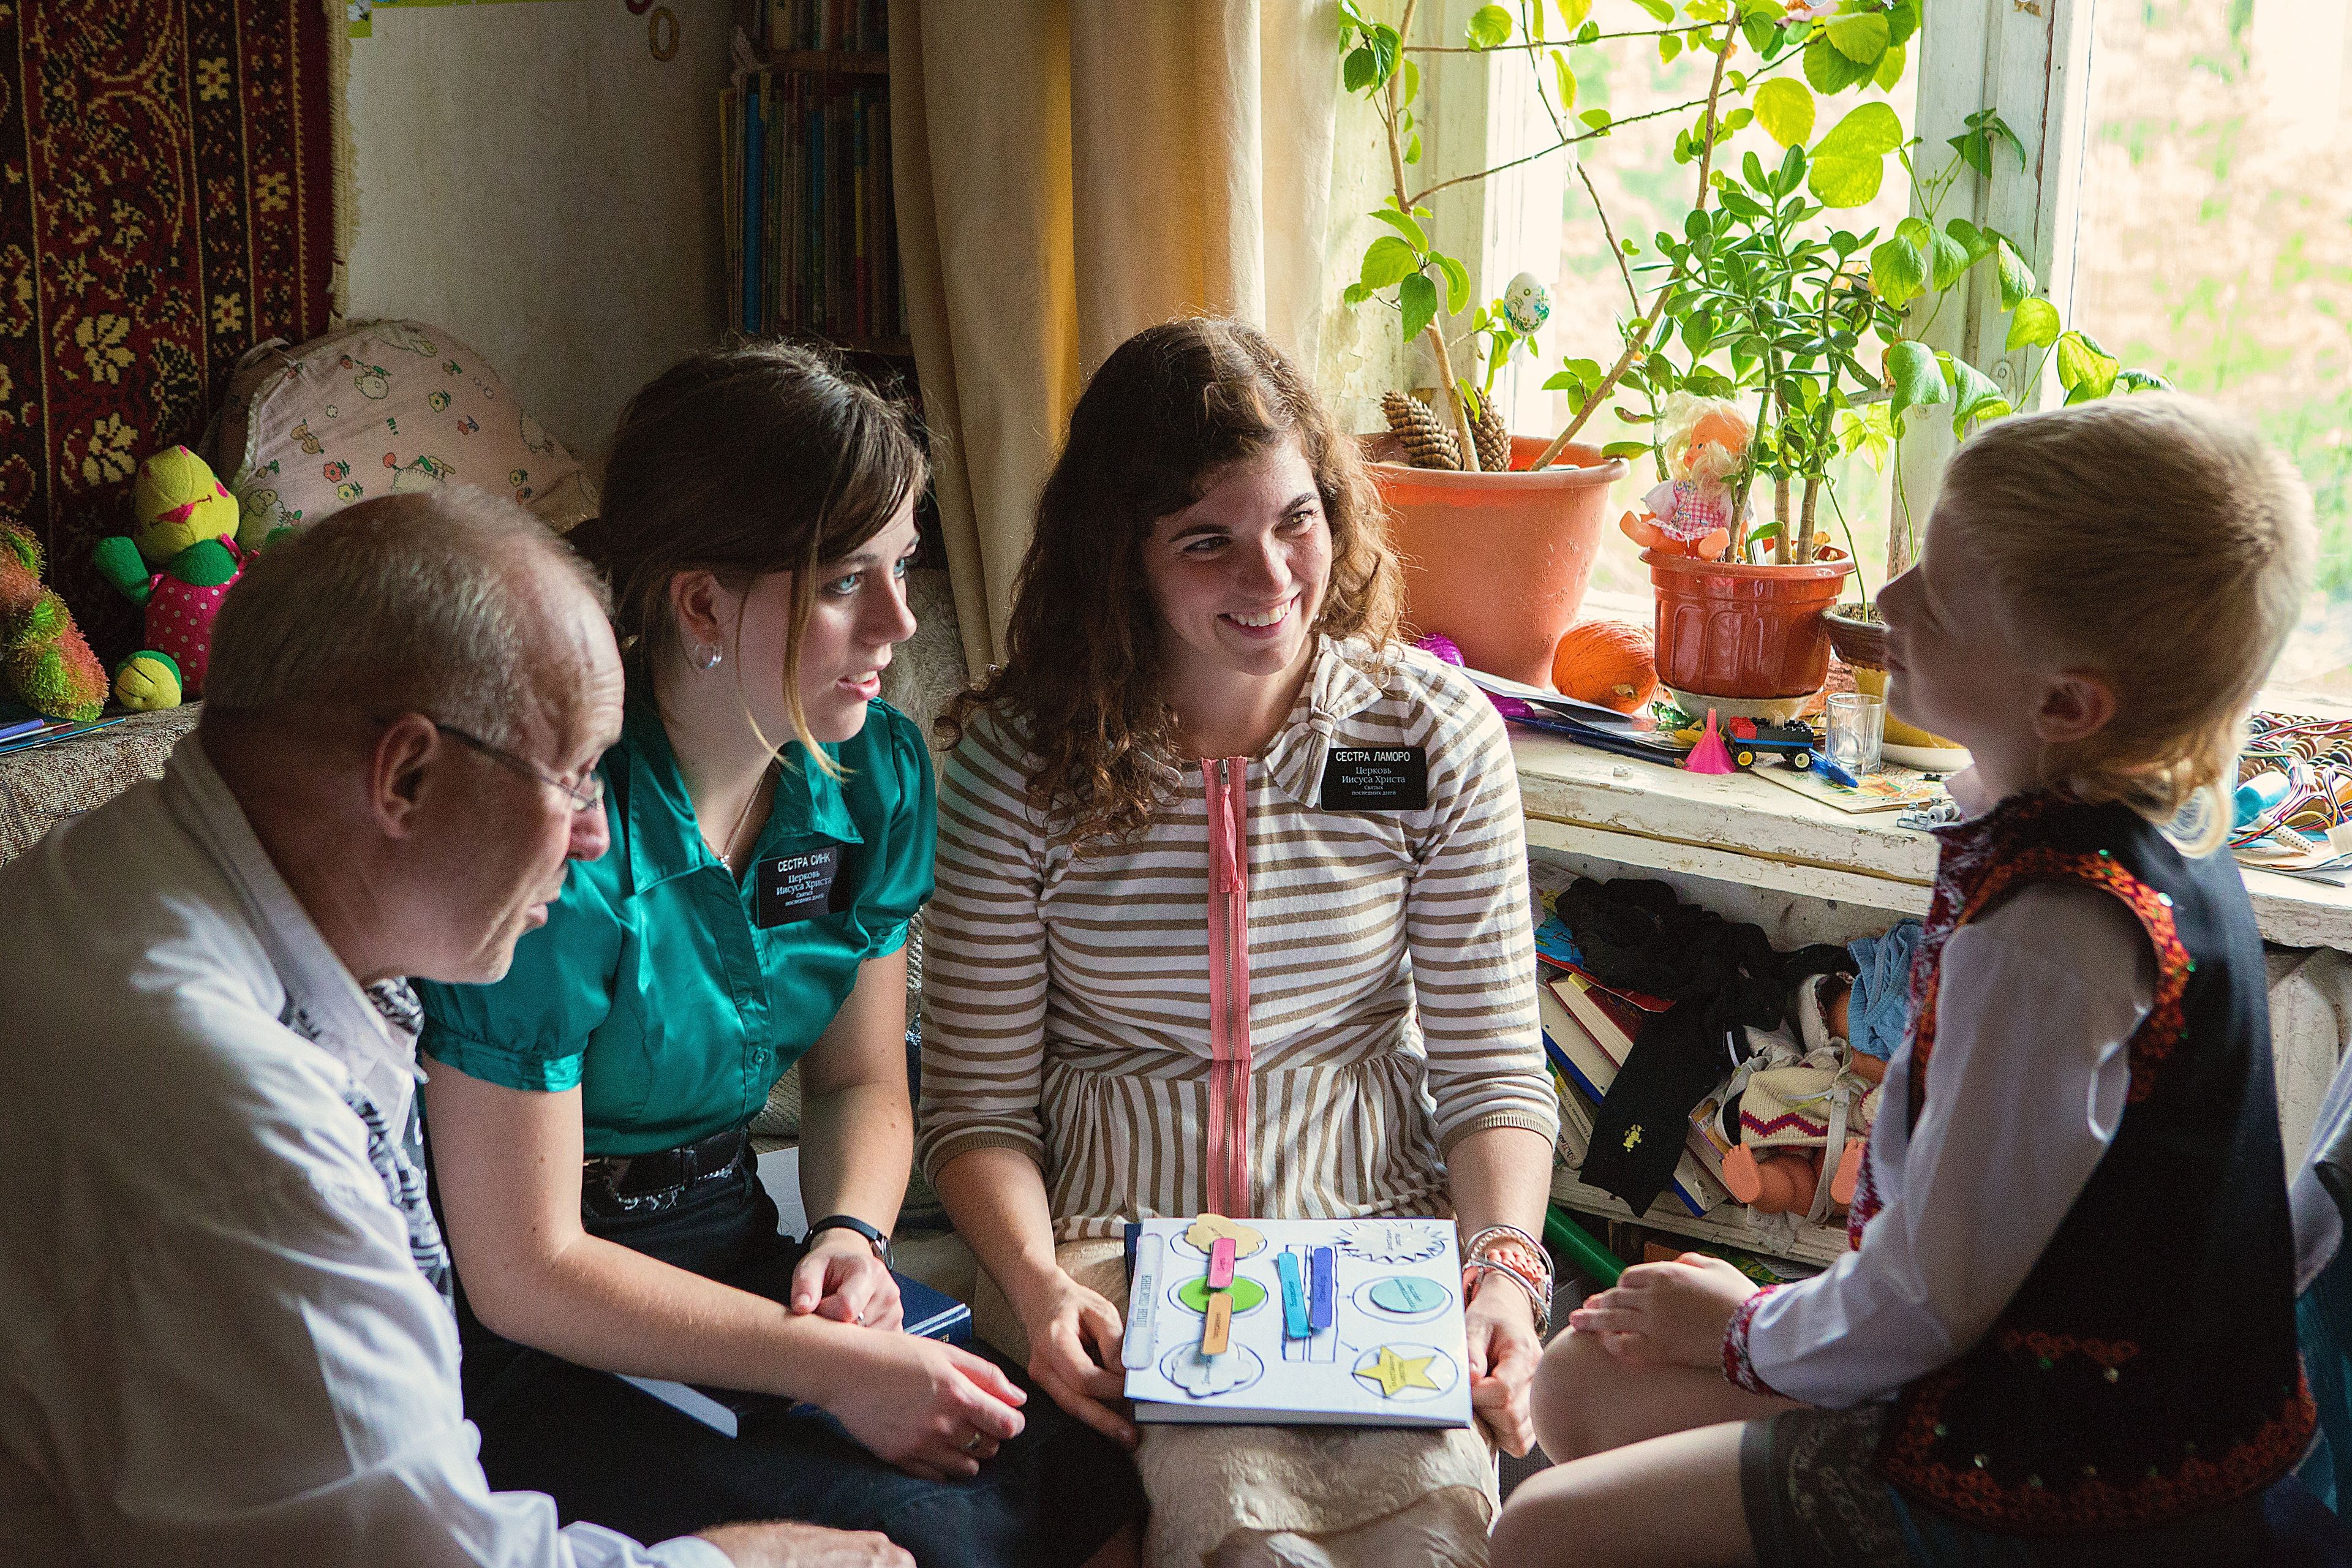 A young boy being taught by two sister missionaries in Ukraine.